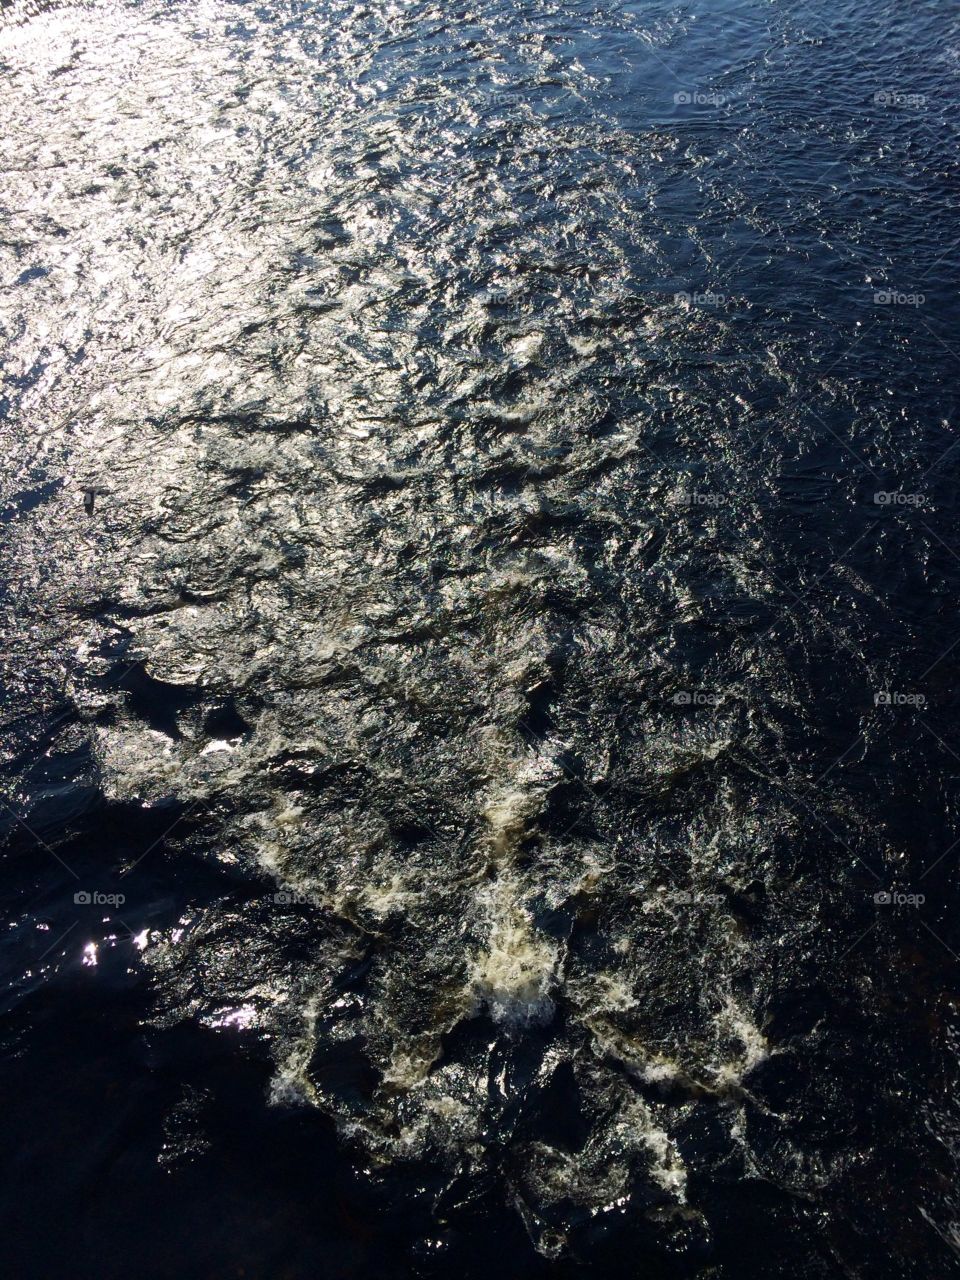 Water from the Bridge. Loved the churn of this dark river - gorgeous texture. Amazing how different bodies of water can be.
